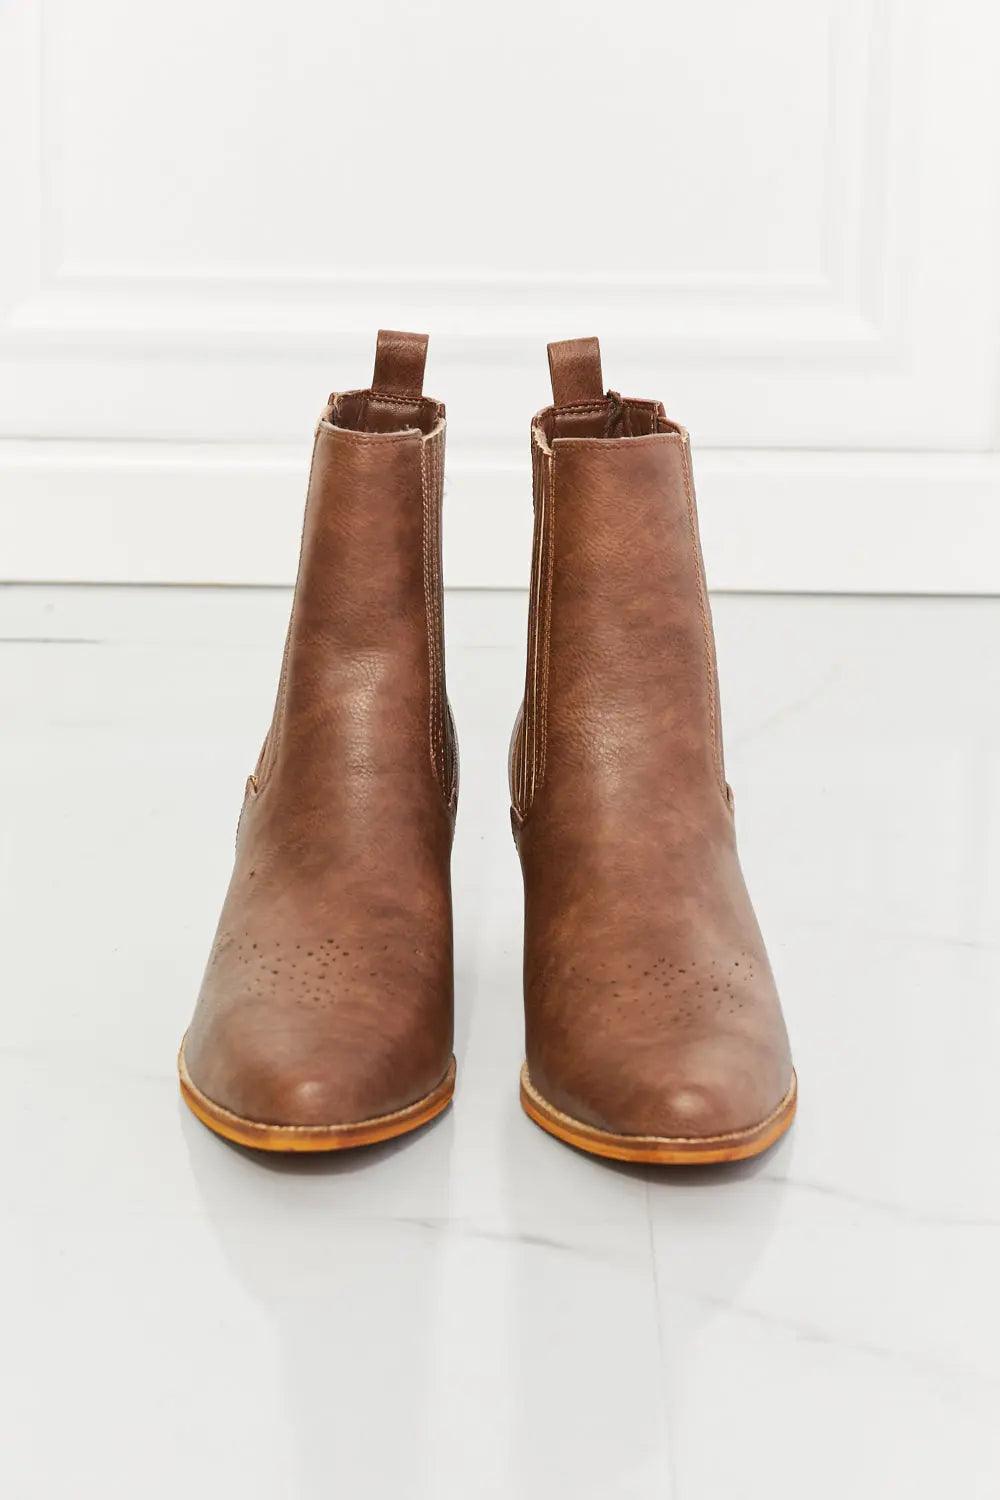 MMShoes Love the Journey Stacked Heel Chelsea Boot in Chestnut - Elena Rae Co.